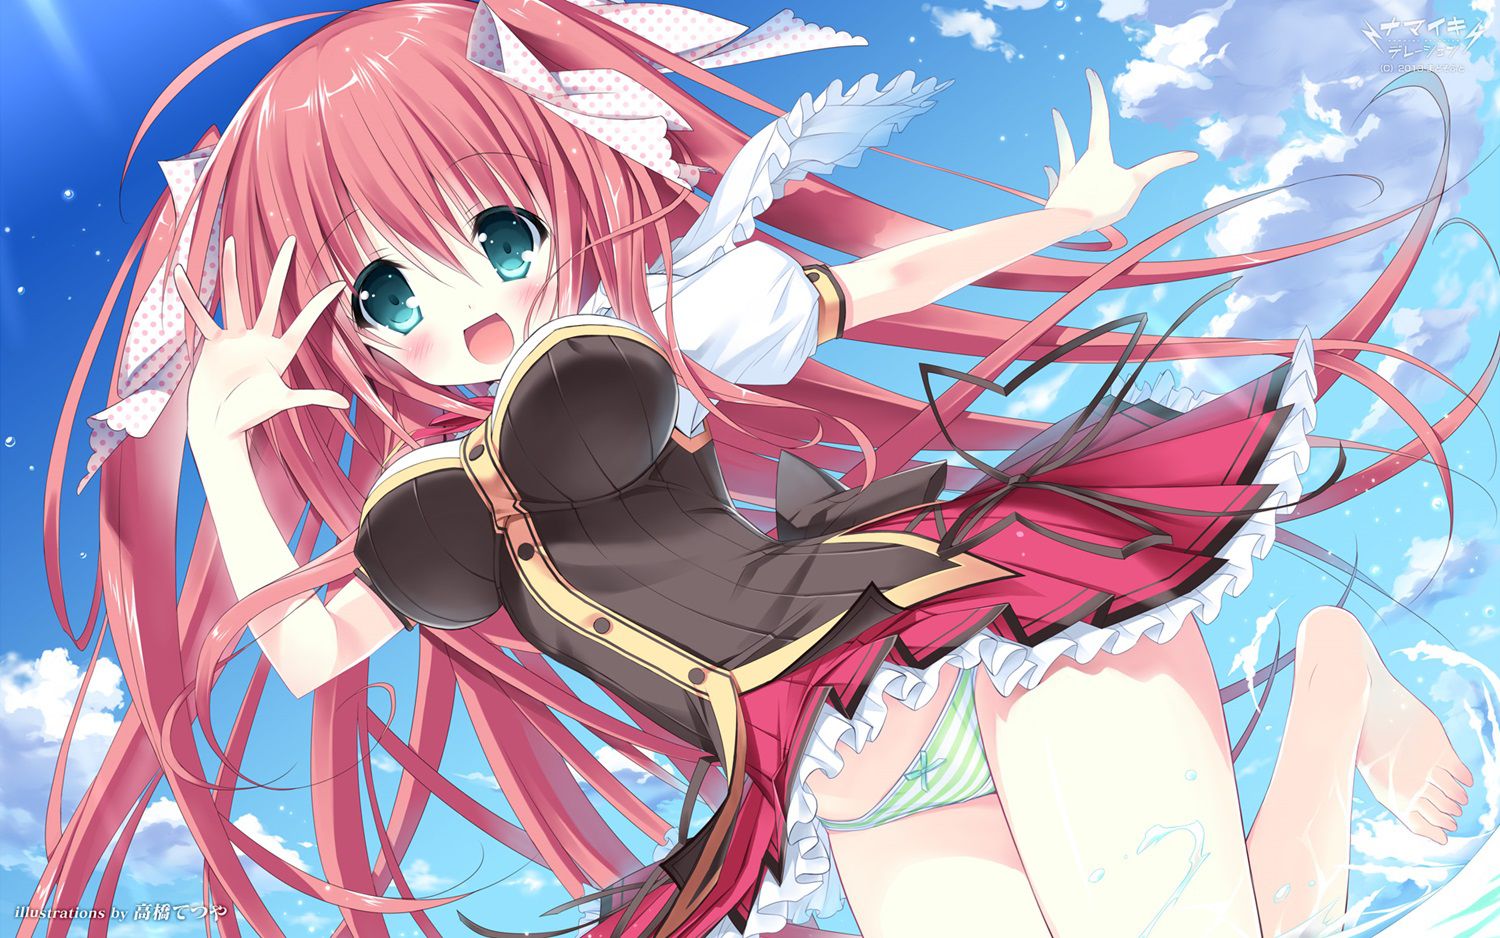 Namickideration [under age 18 prohibited eroge CG] wallpapers, images 3